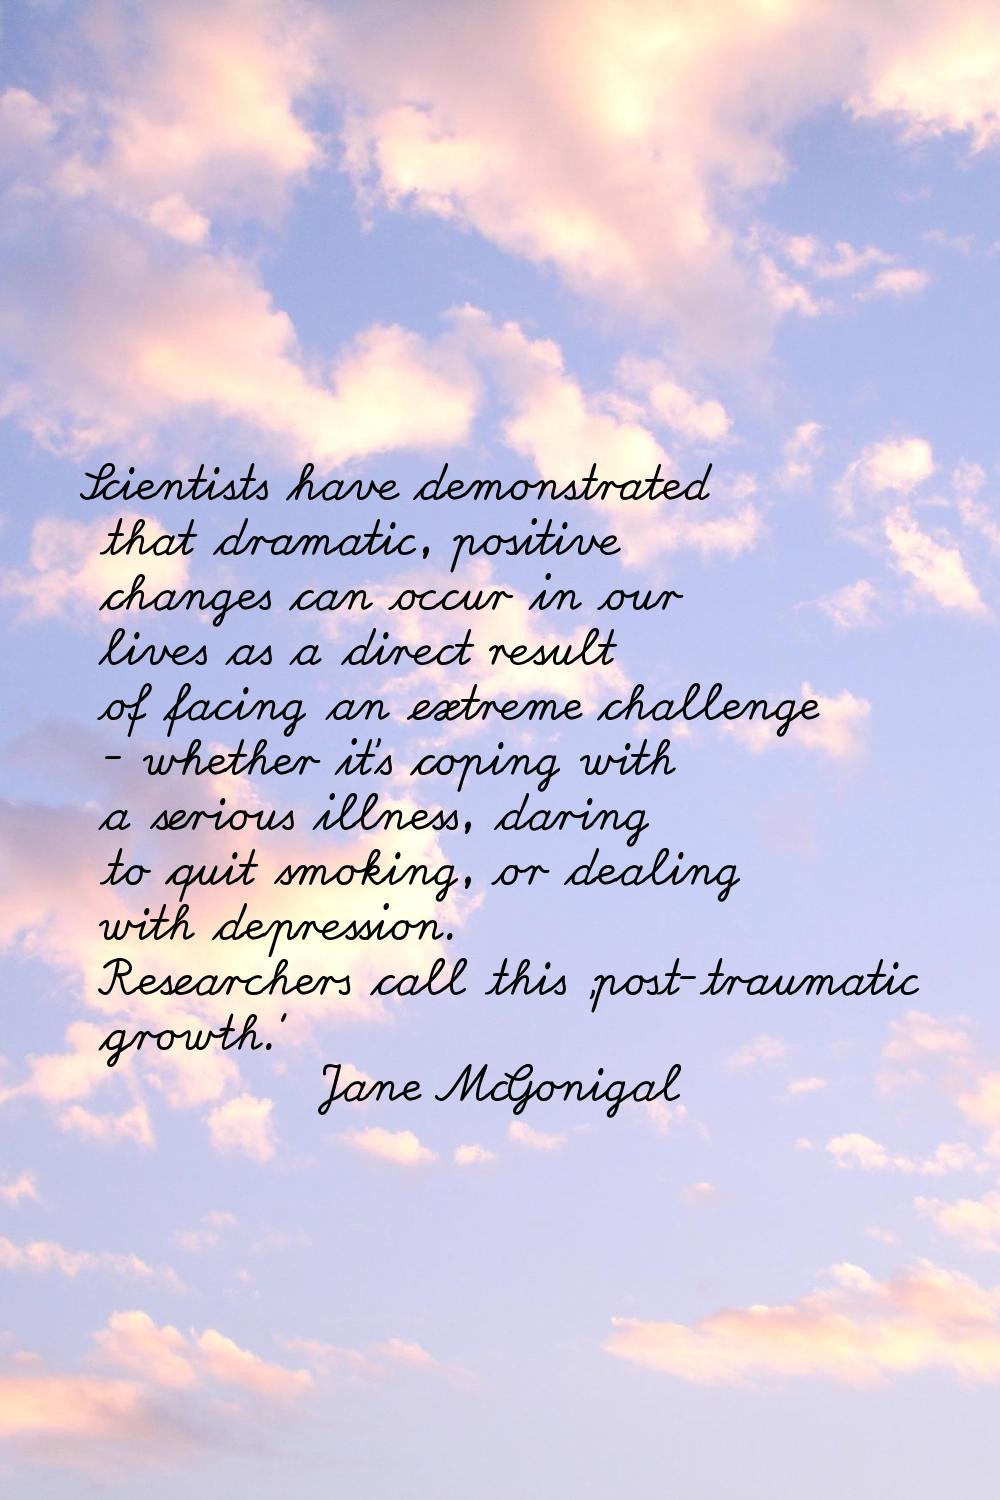 Scientists have demonstrated that dramatic, positive changes can occur in our lives as a direct res